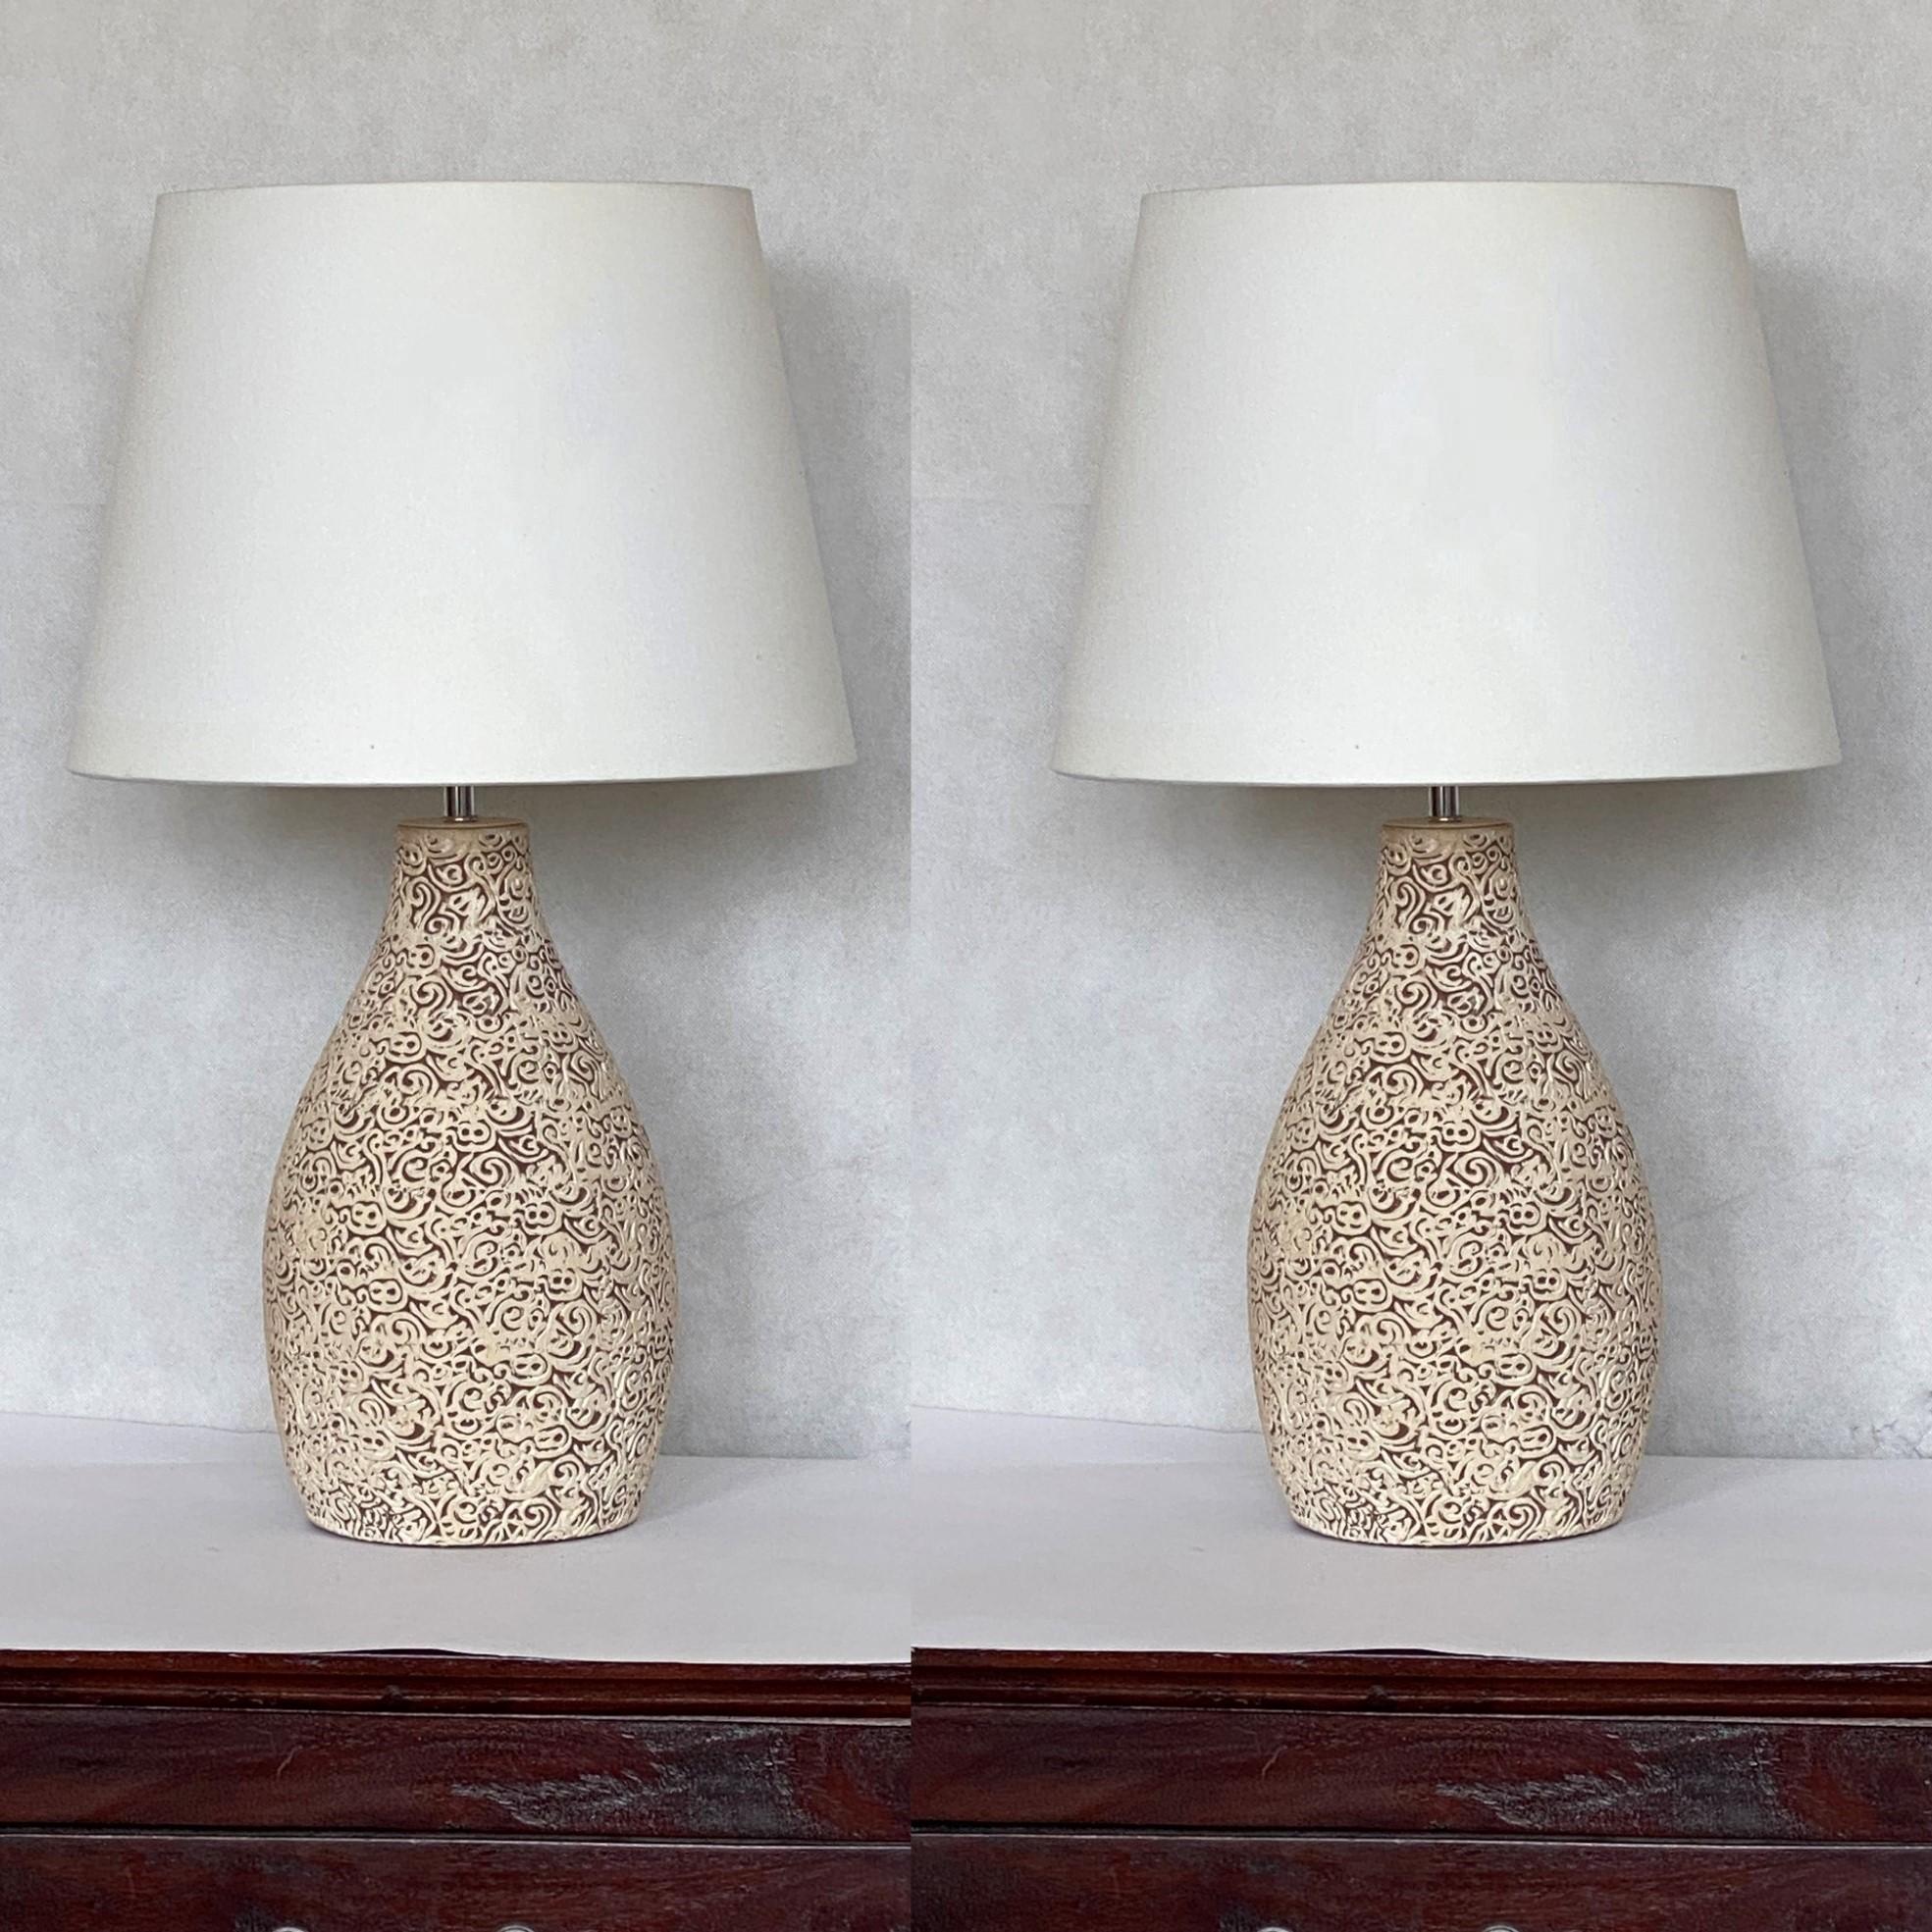 A pair of French ceramic vase table lamps. Hand-crafted round ceramic body in structured organic form with new fabric lamp shades, France, 1960s. Both lamps in fine vintage condition, no damages, rewired, new shades. Switch to turn on and off on